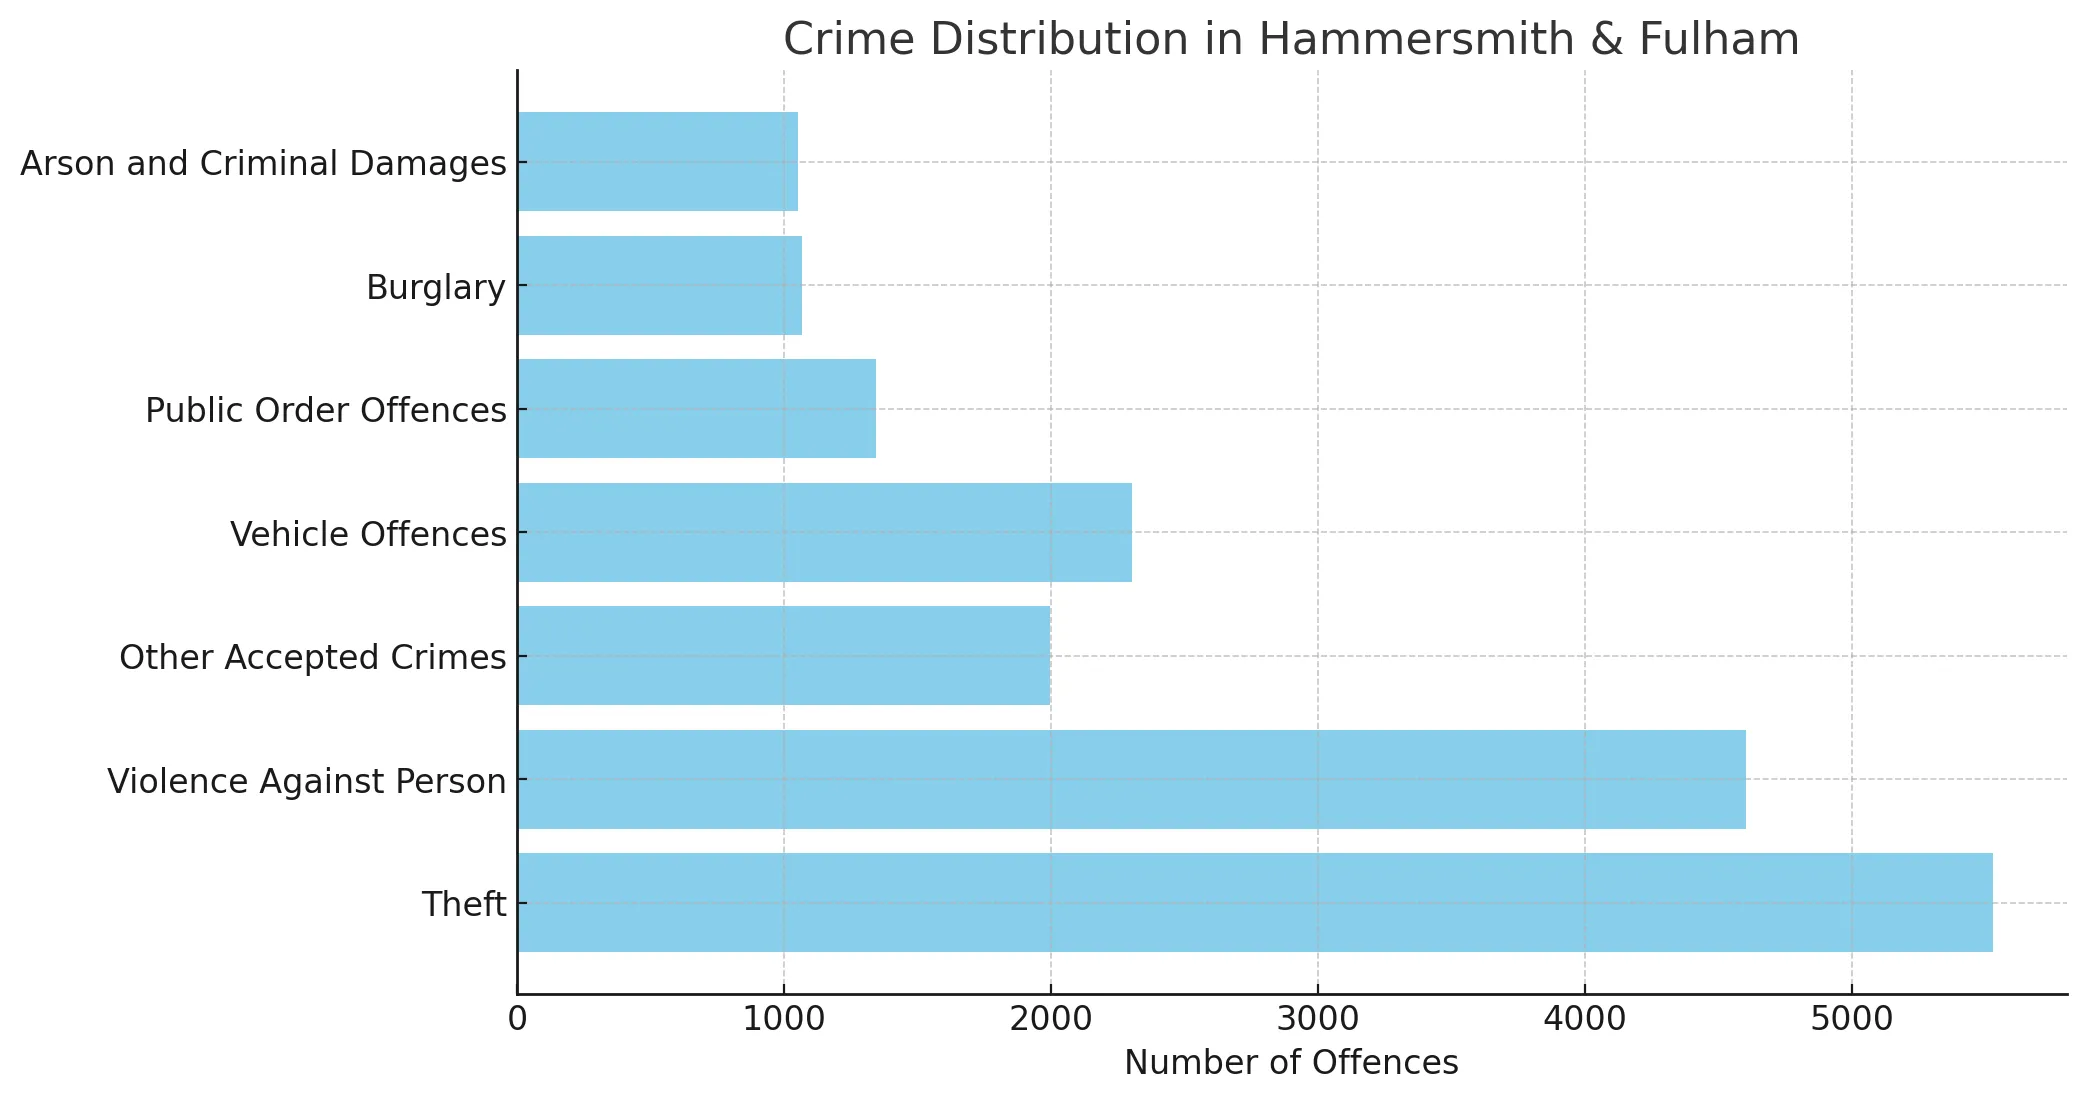  The bar chart titled "Crime Distribution in Hammersmith & Fulham" shows the number of offences for various crime categories.